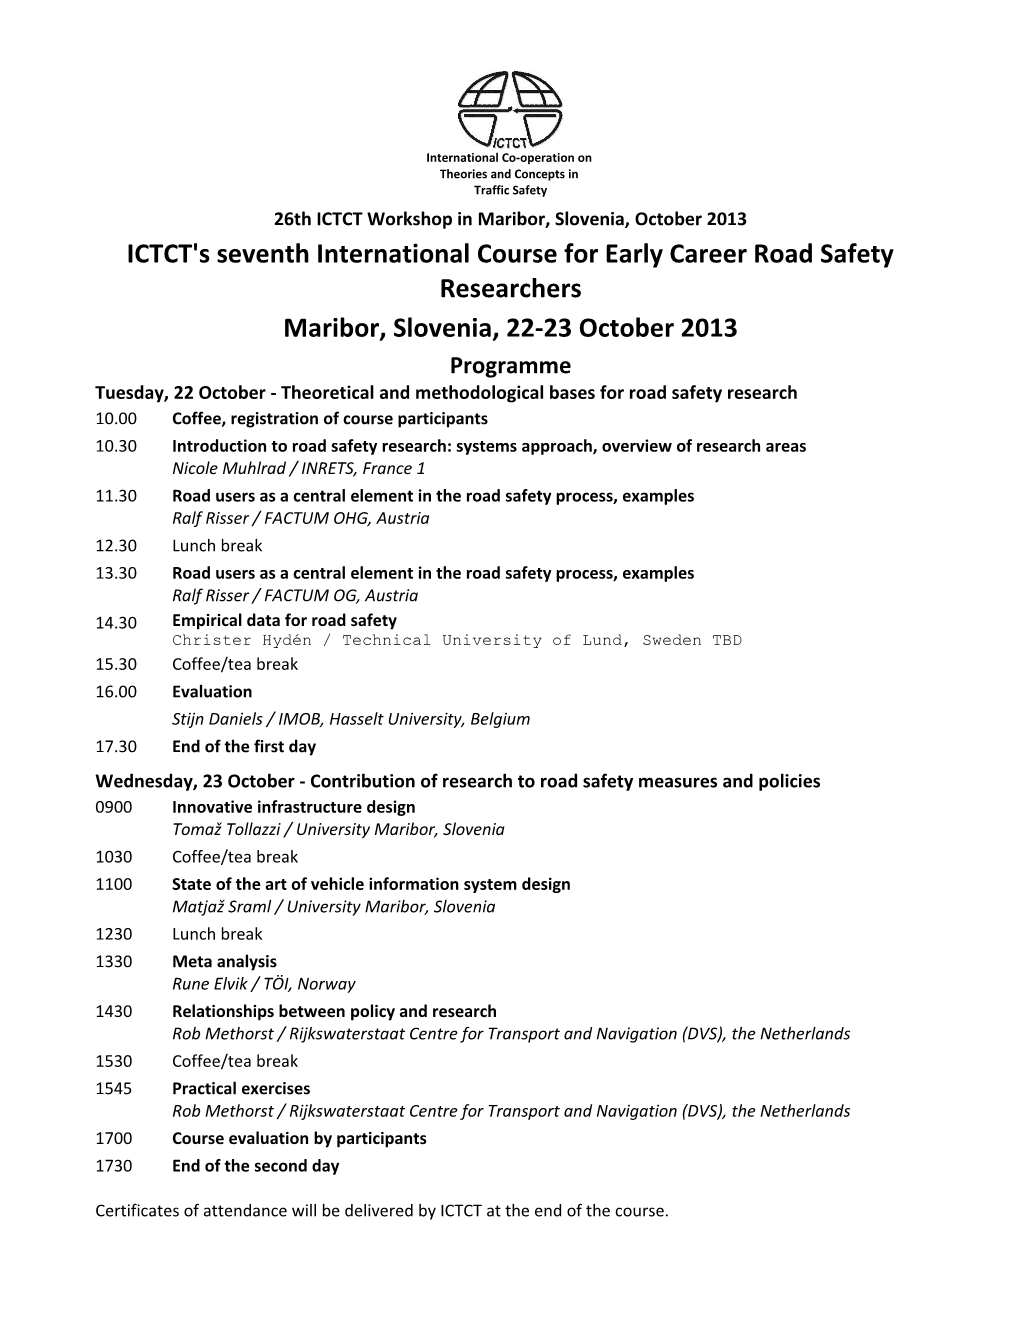 ICTCT's Seventh International Course for Early Career Road Safety Researchers